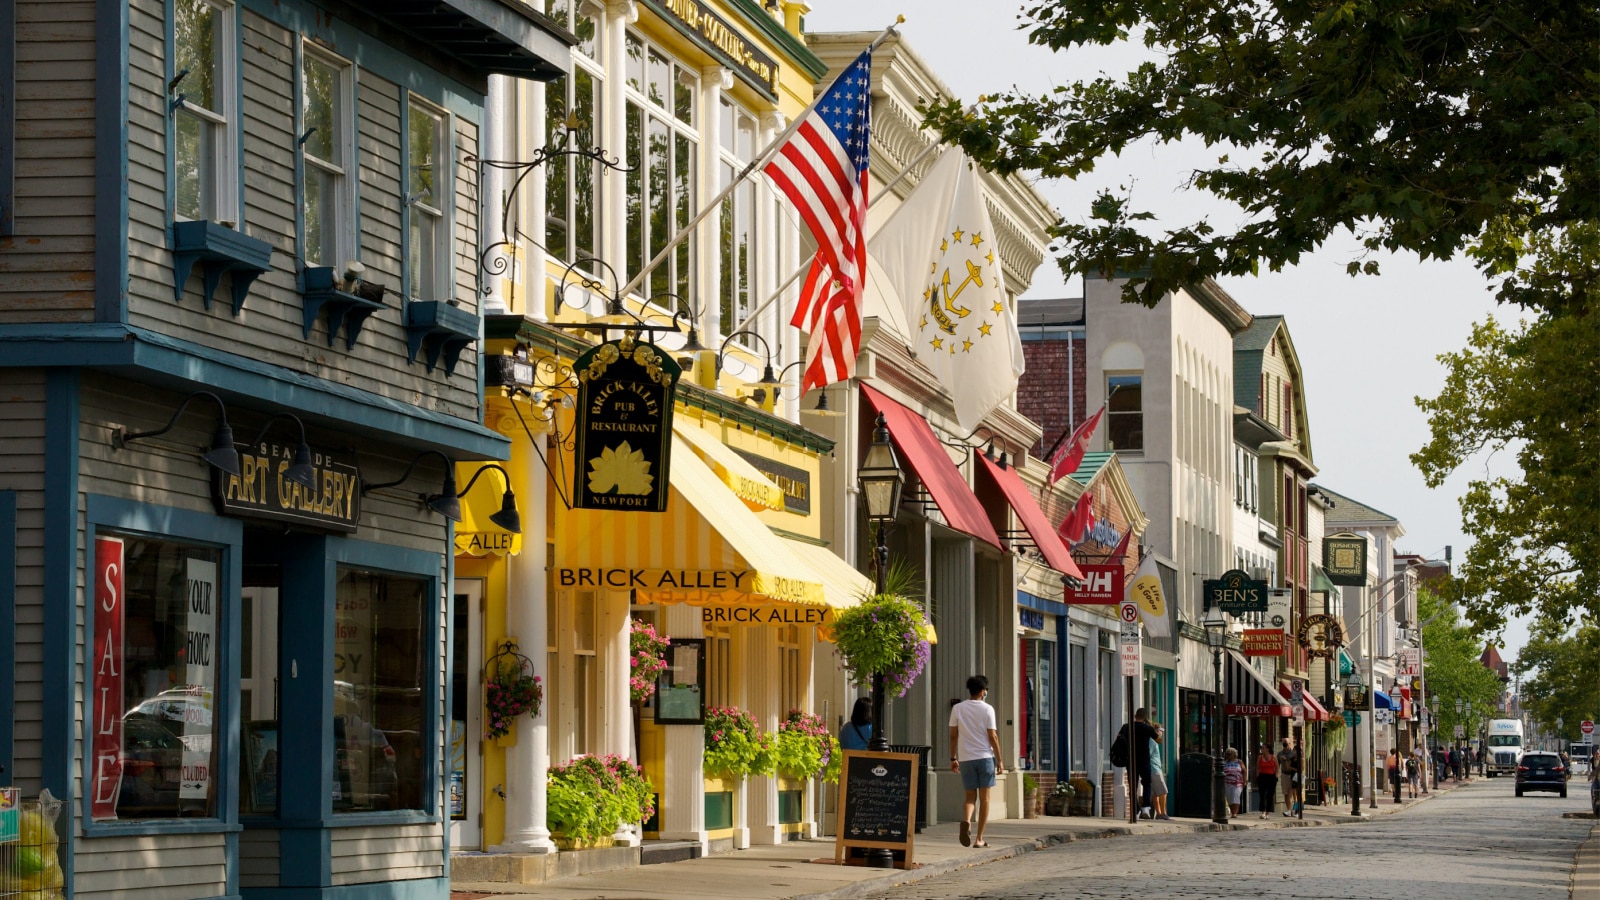 Newport, RI USA - December 19, 2020: The historic seaside city of Newport, Rhode Island features iconic architecture, whimsical signs and colorful displays of nature.